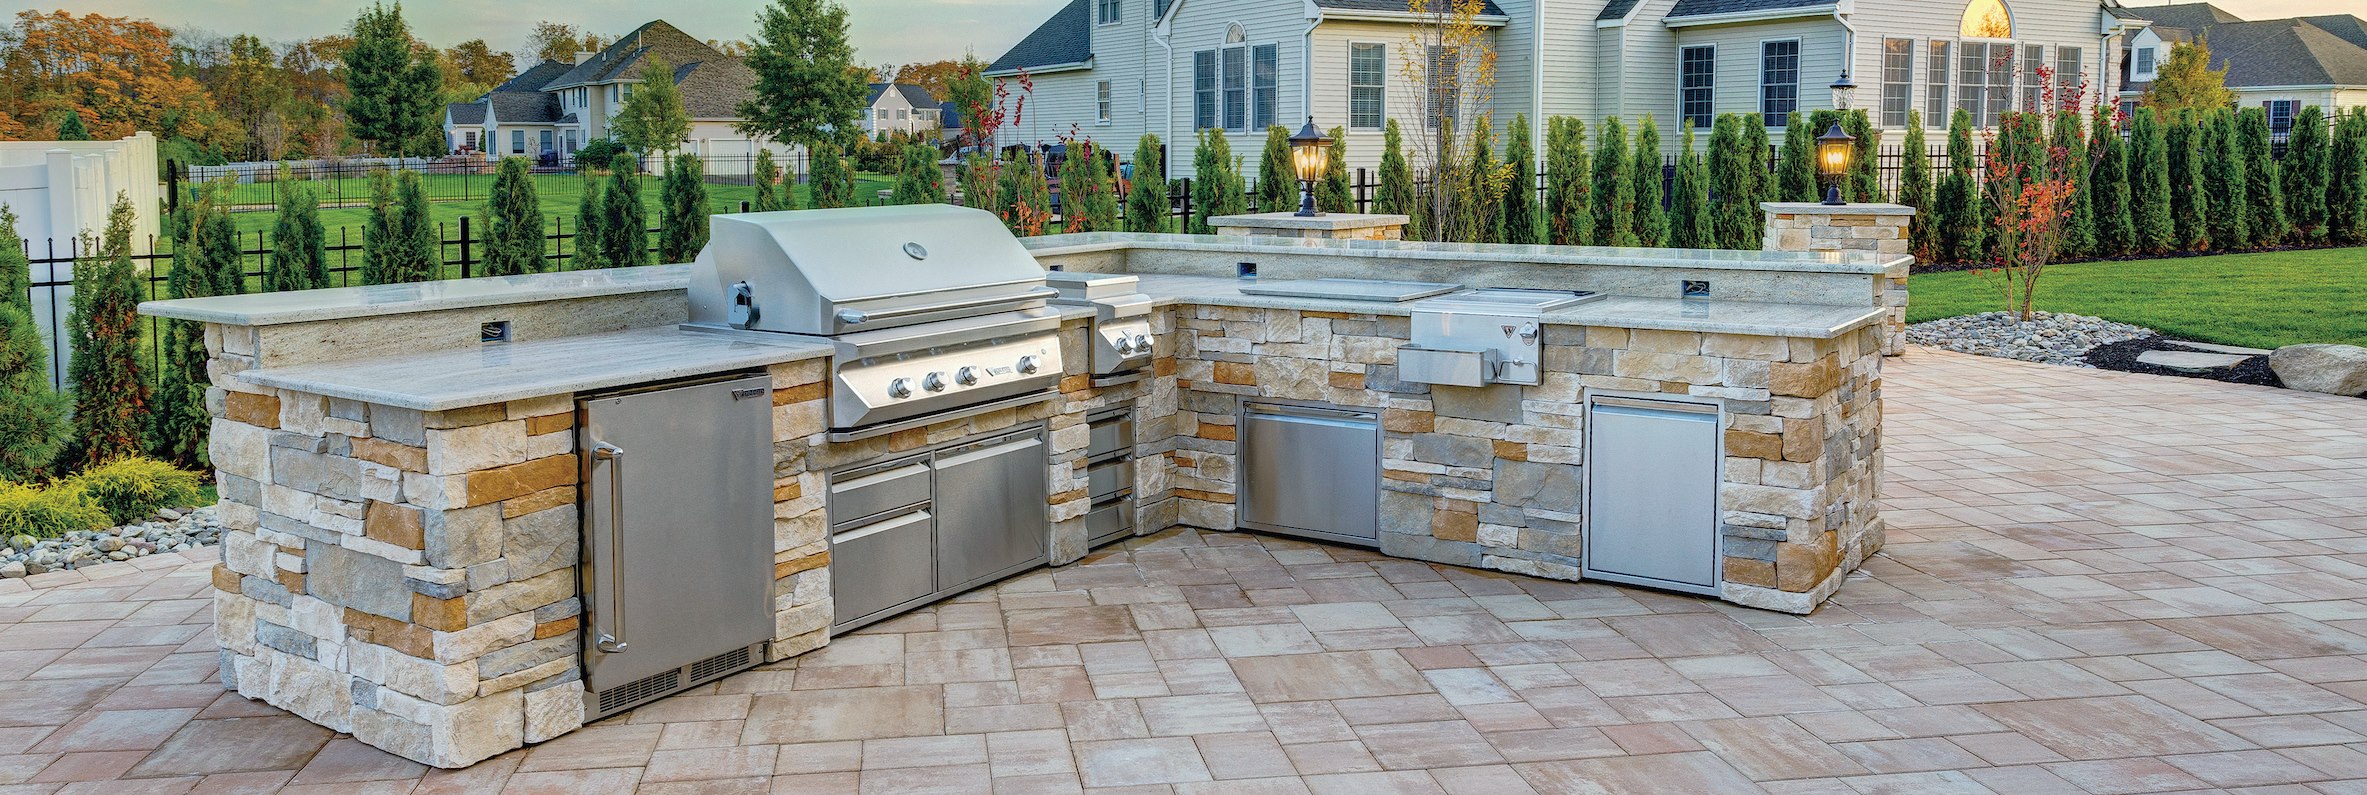 Making And Maintaining An Outdoor Kitchen Is Easier Than You Think Ep Henry